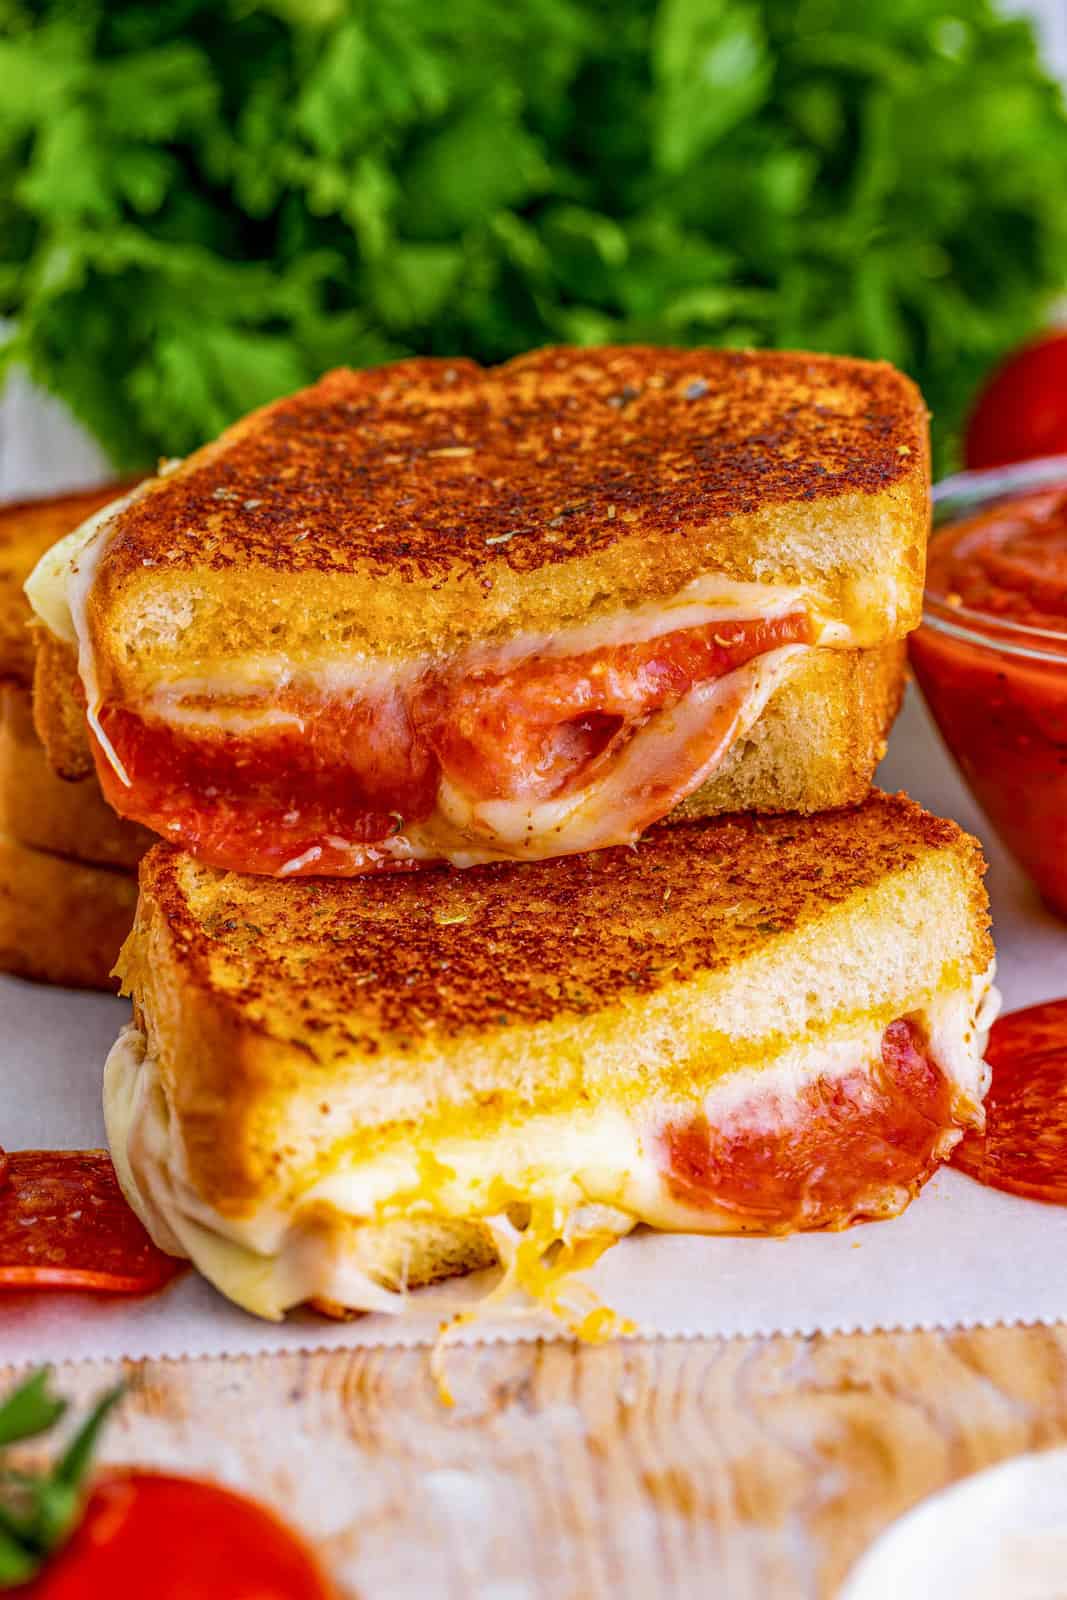 One Pizza Grilled Cheese cut in half stacked on top of one another showing melted inside.